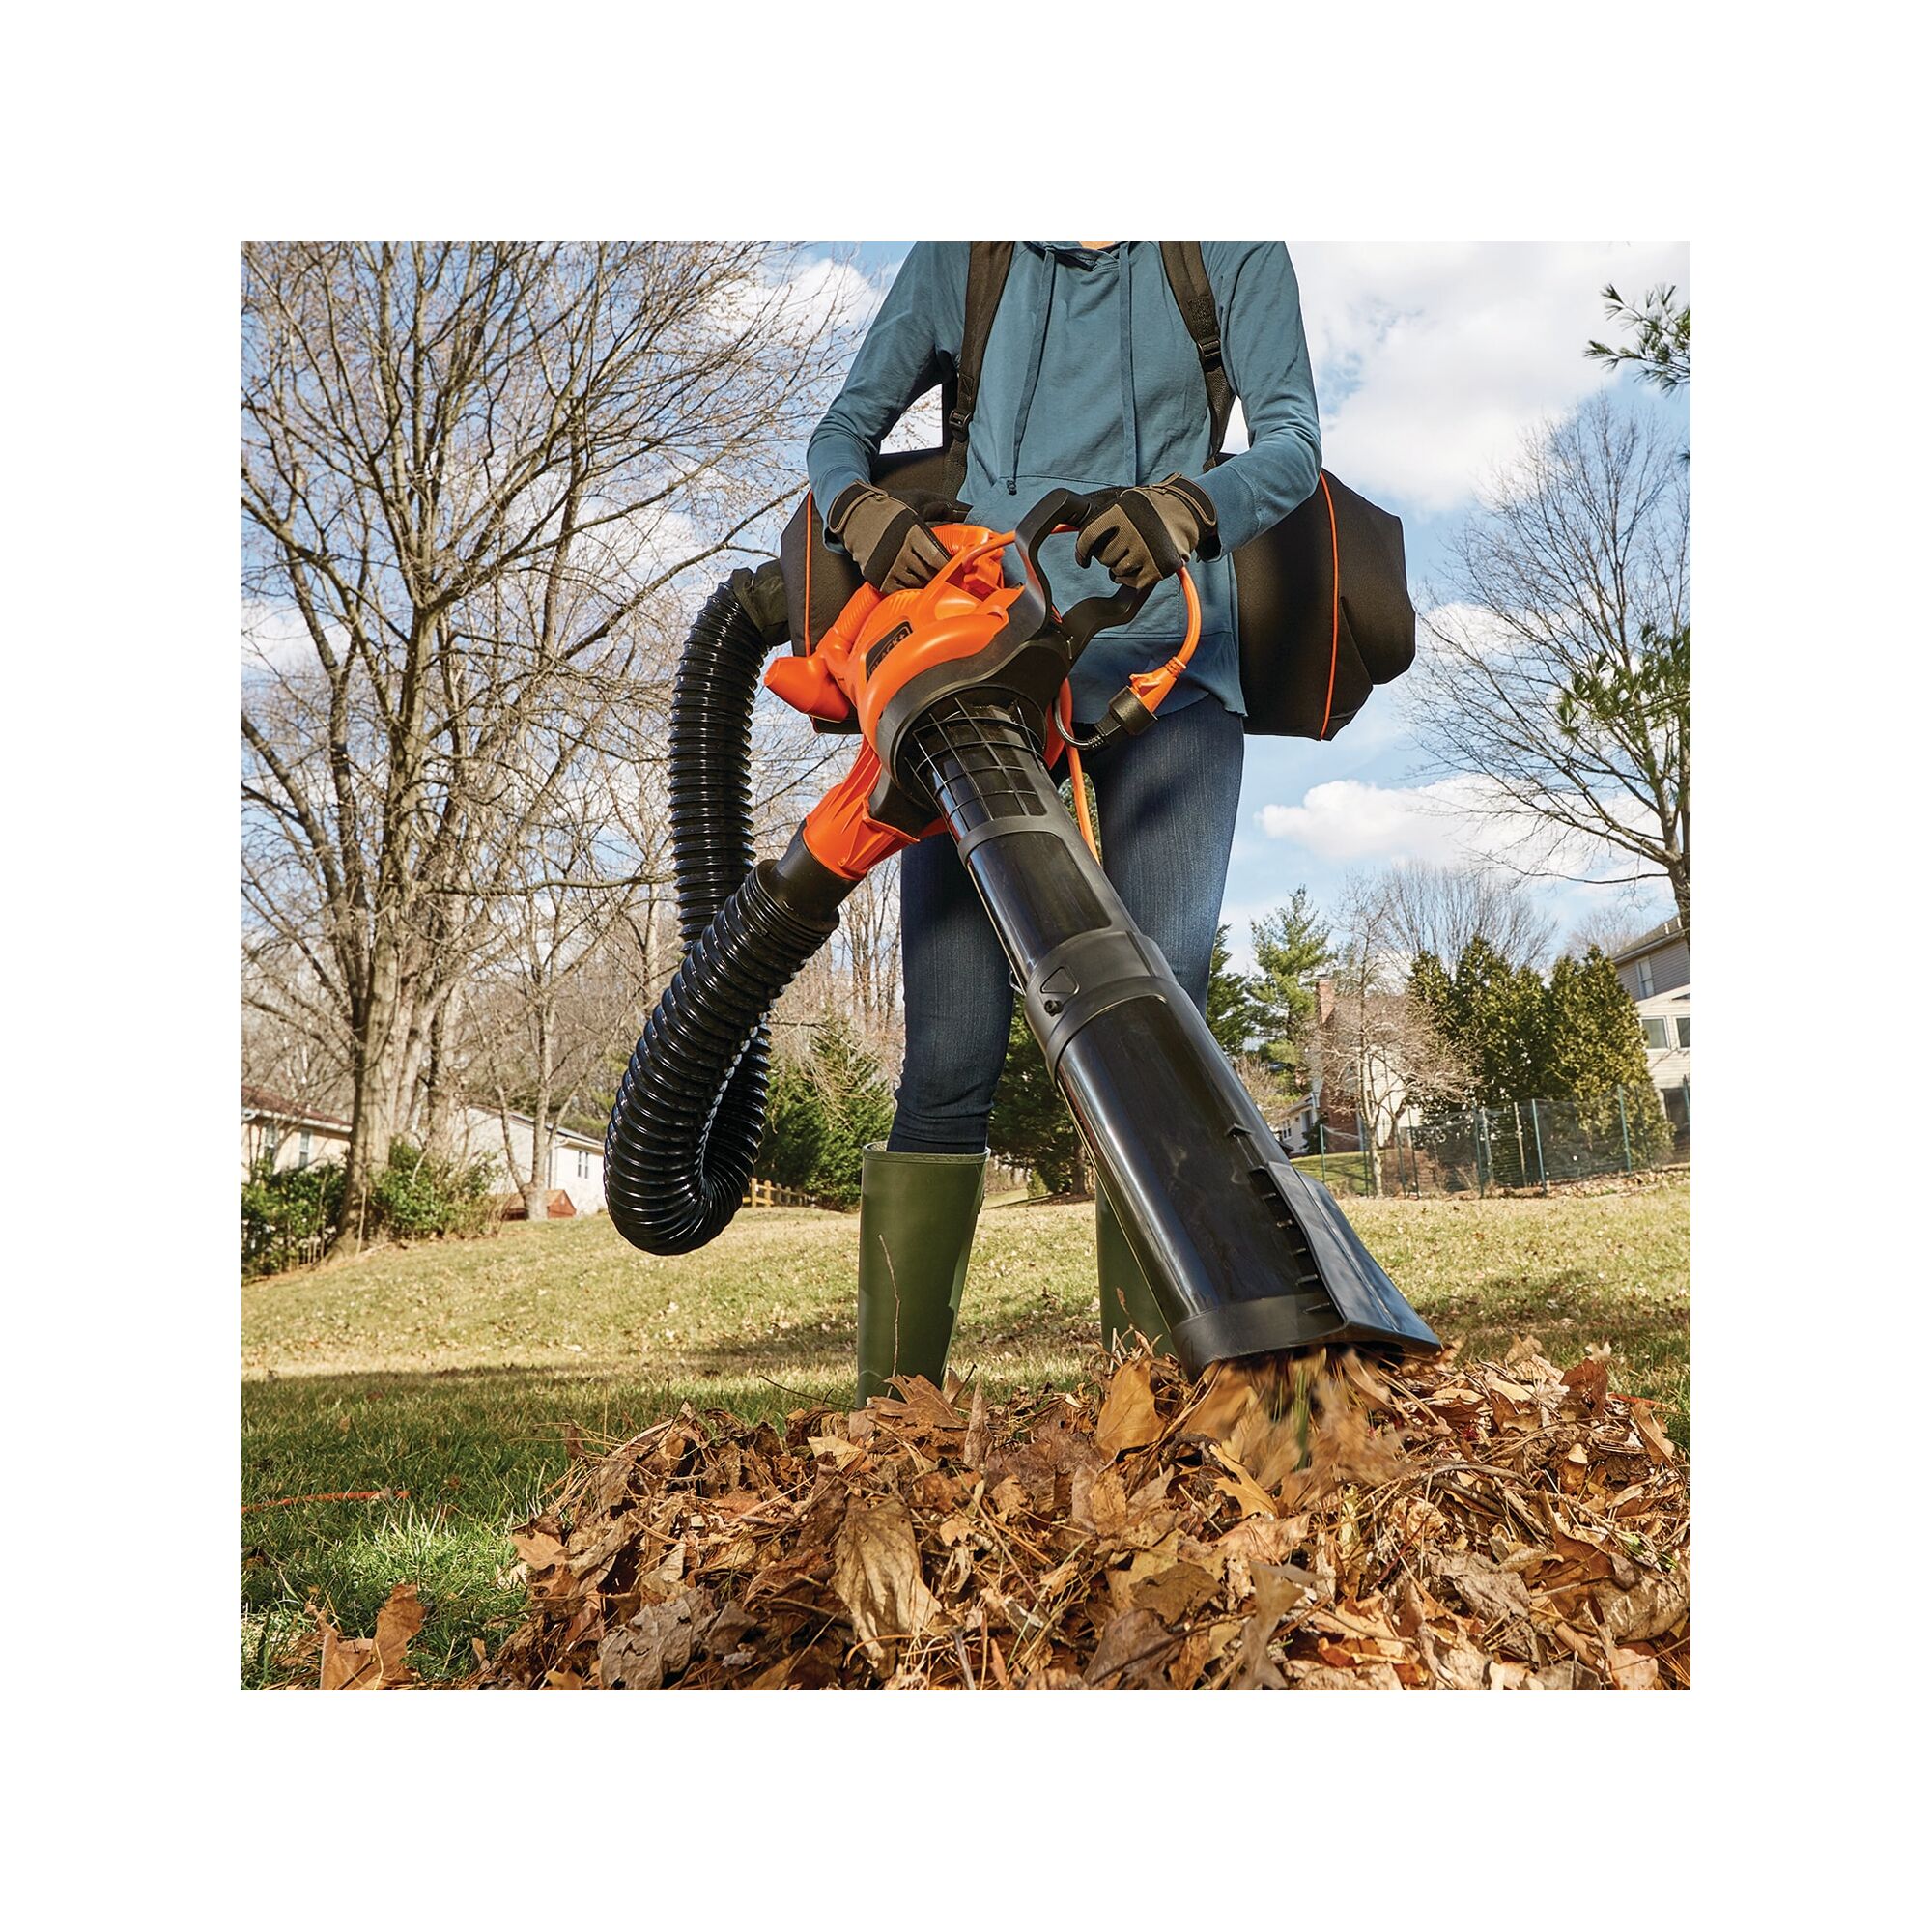 3 in 1 VAC PACK 12 Amp Leaf Blower Vacuum and Mulcher being used by person to clear dried leaves outdoors.